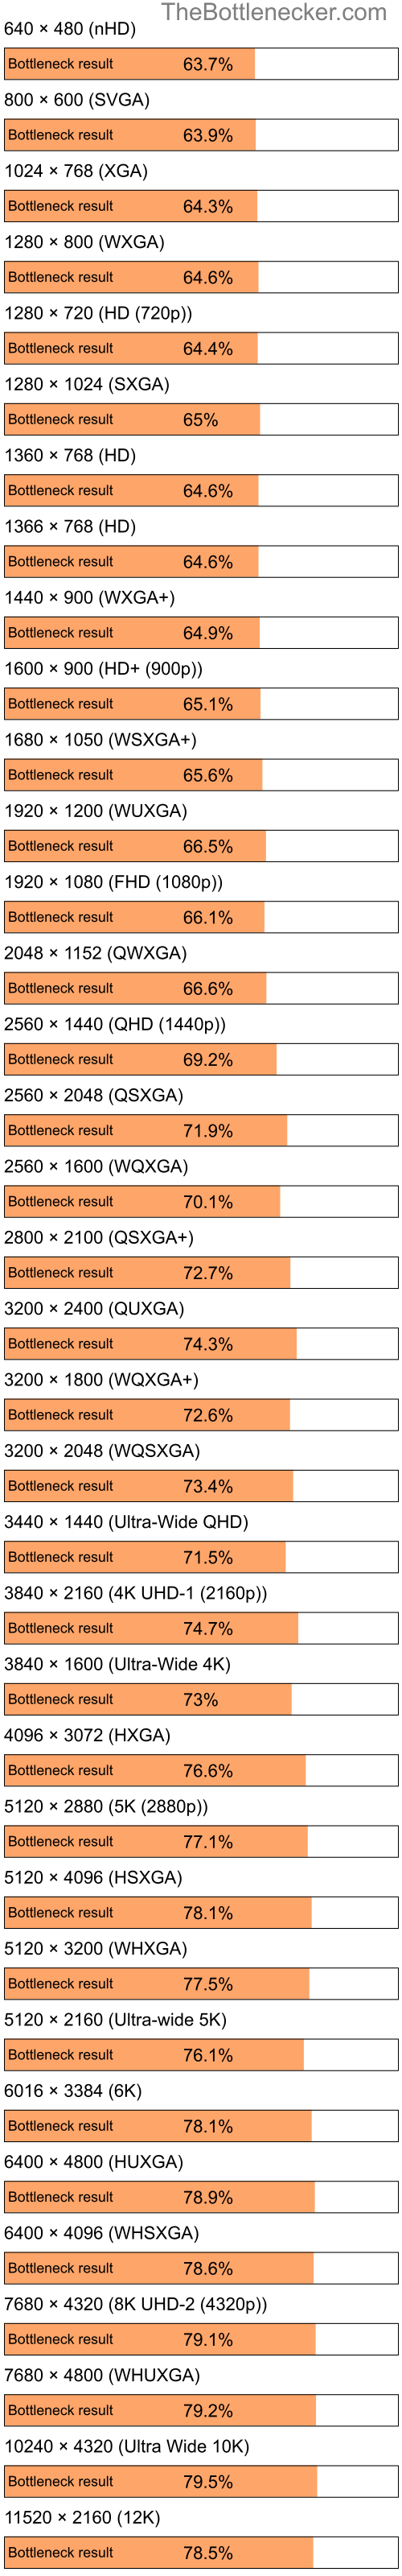 Bottleneck results by resolution for Intel Celeron M 420 and AMD Mobility Radeon HD 2400 in General Tasks